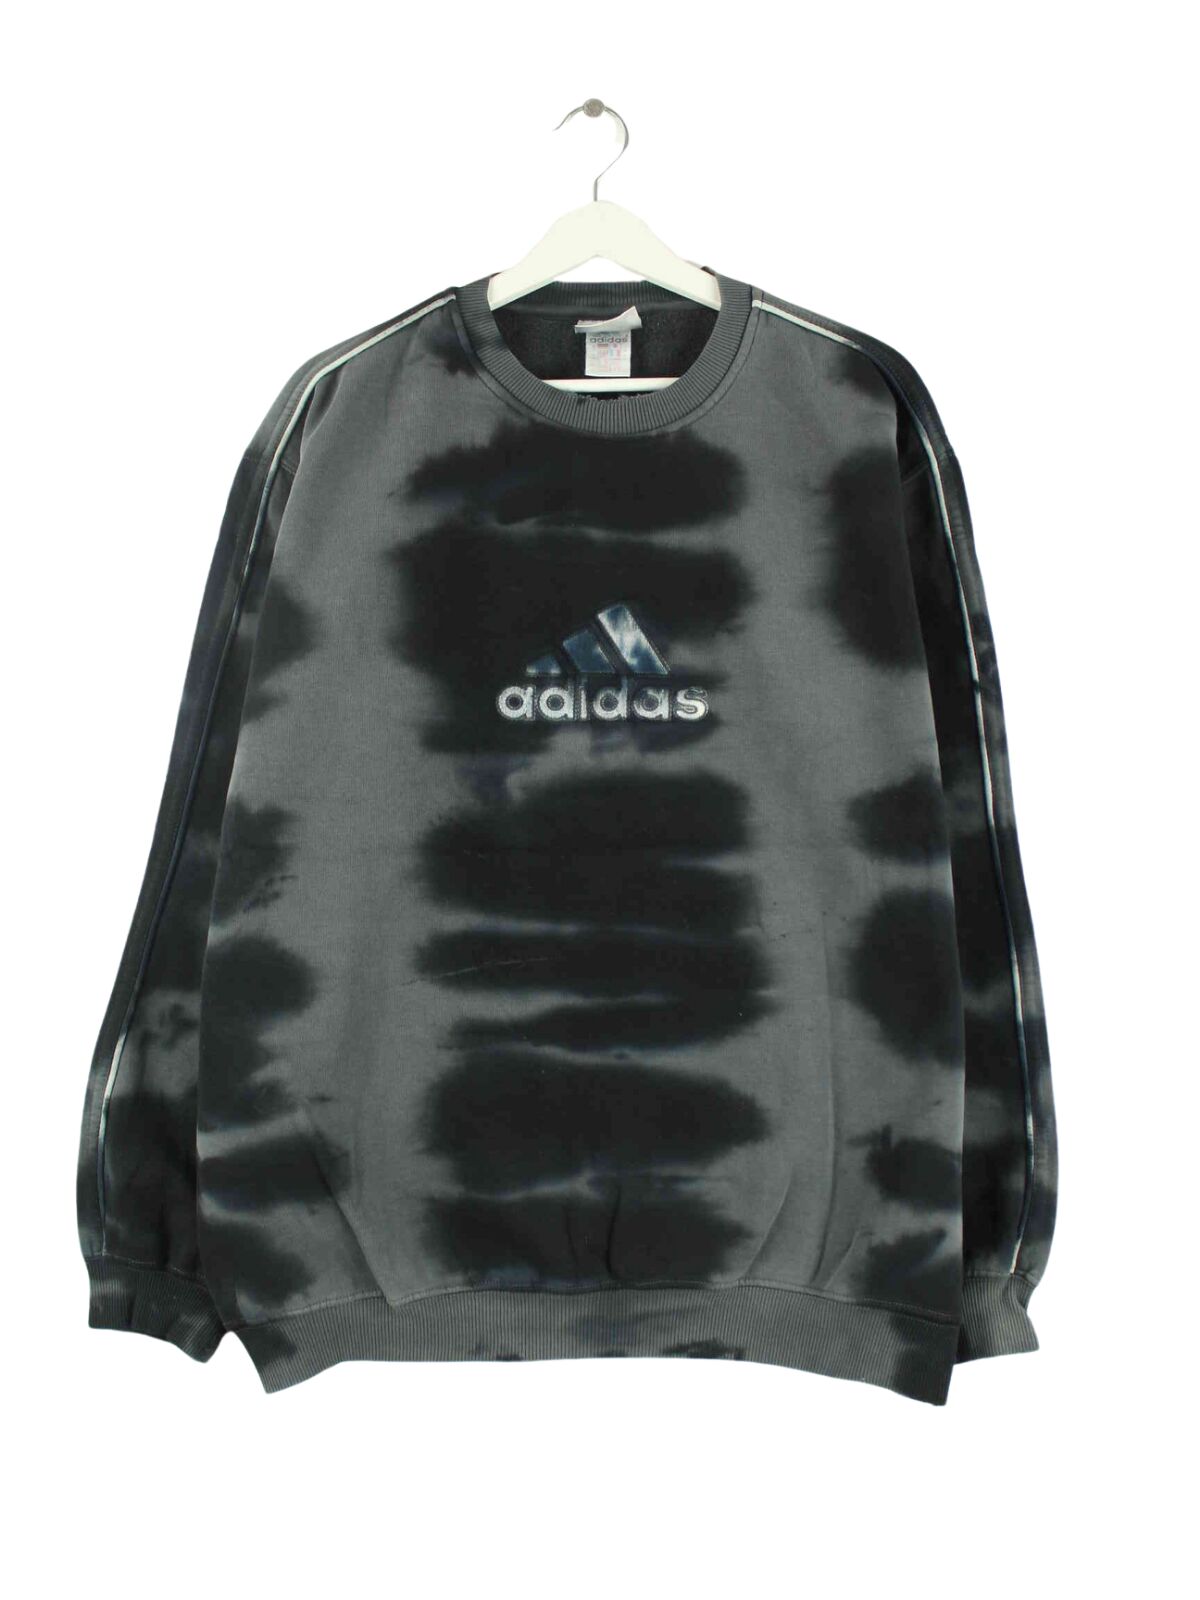 Adidas 90s Vintage Big Logo Embroidered Tie Dye Sweater Grau M (front image)